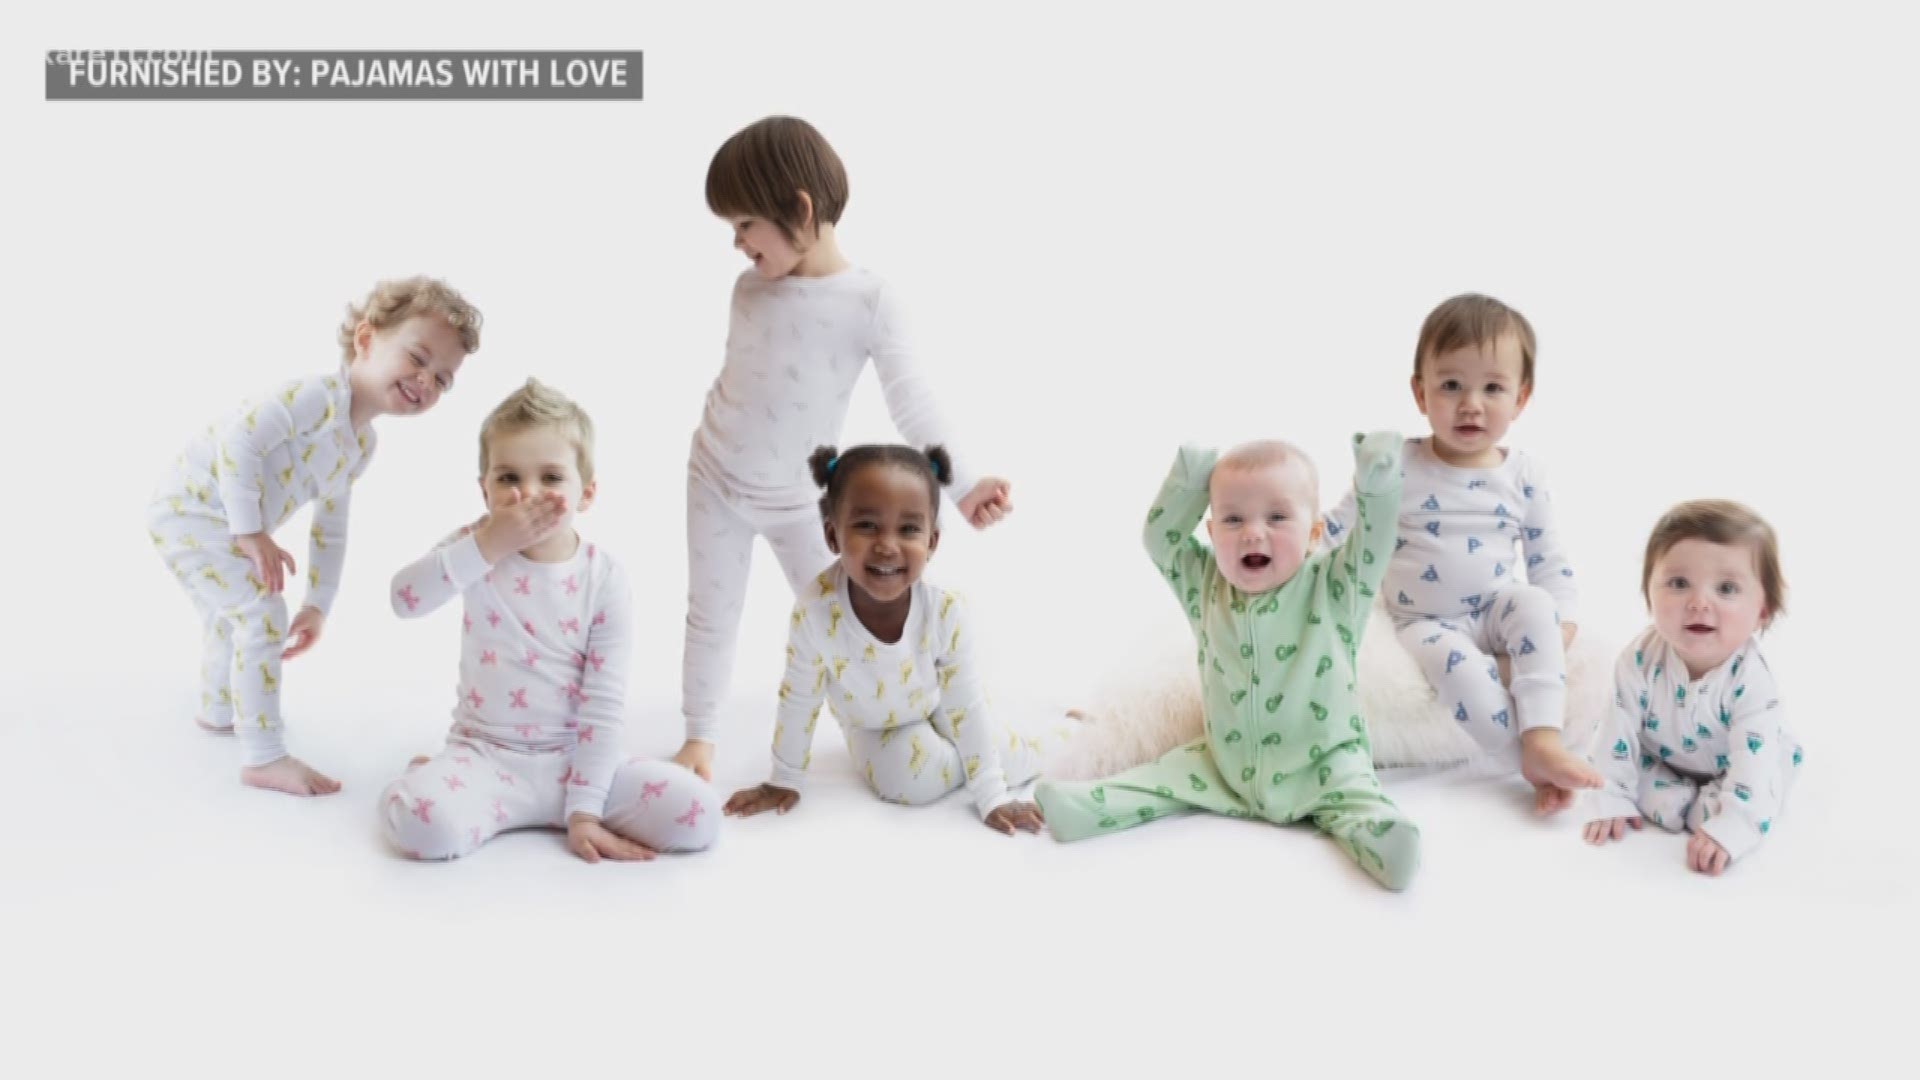 The Minnesota children's apparel company, Pajamas with Love, is doing its part to support pediatric cancer research.